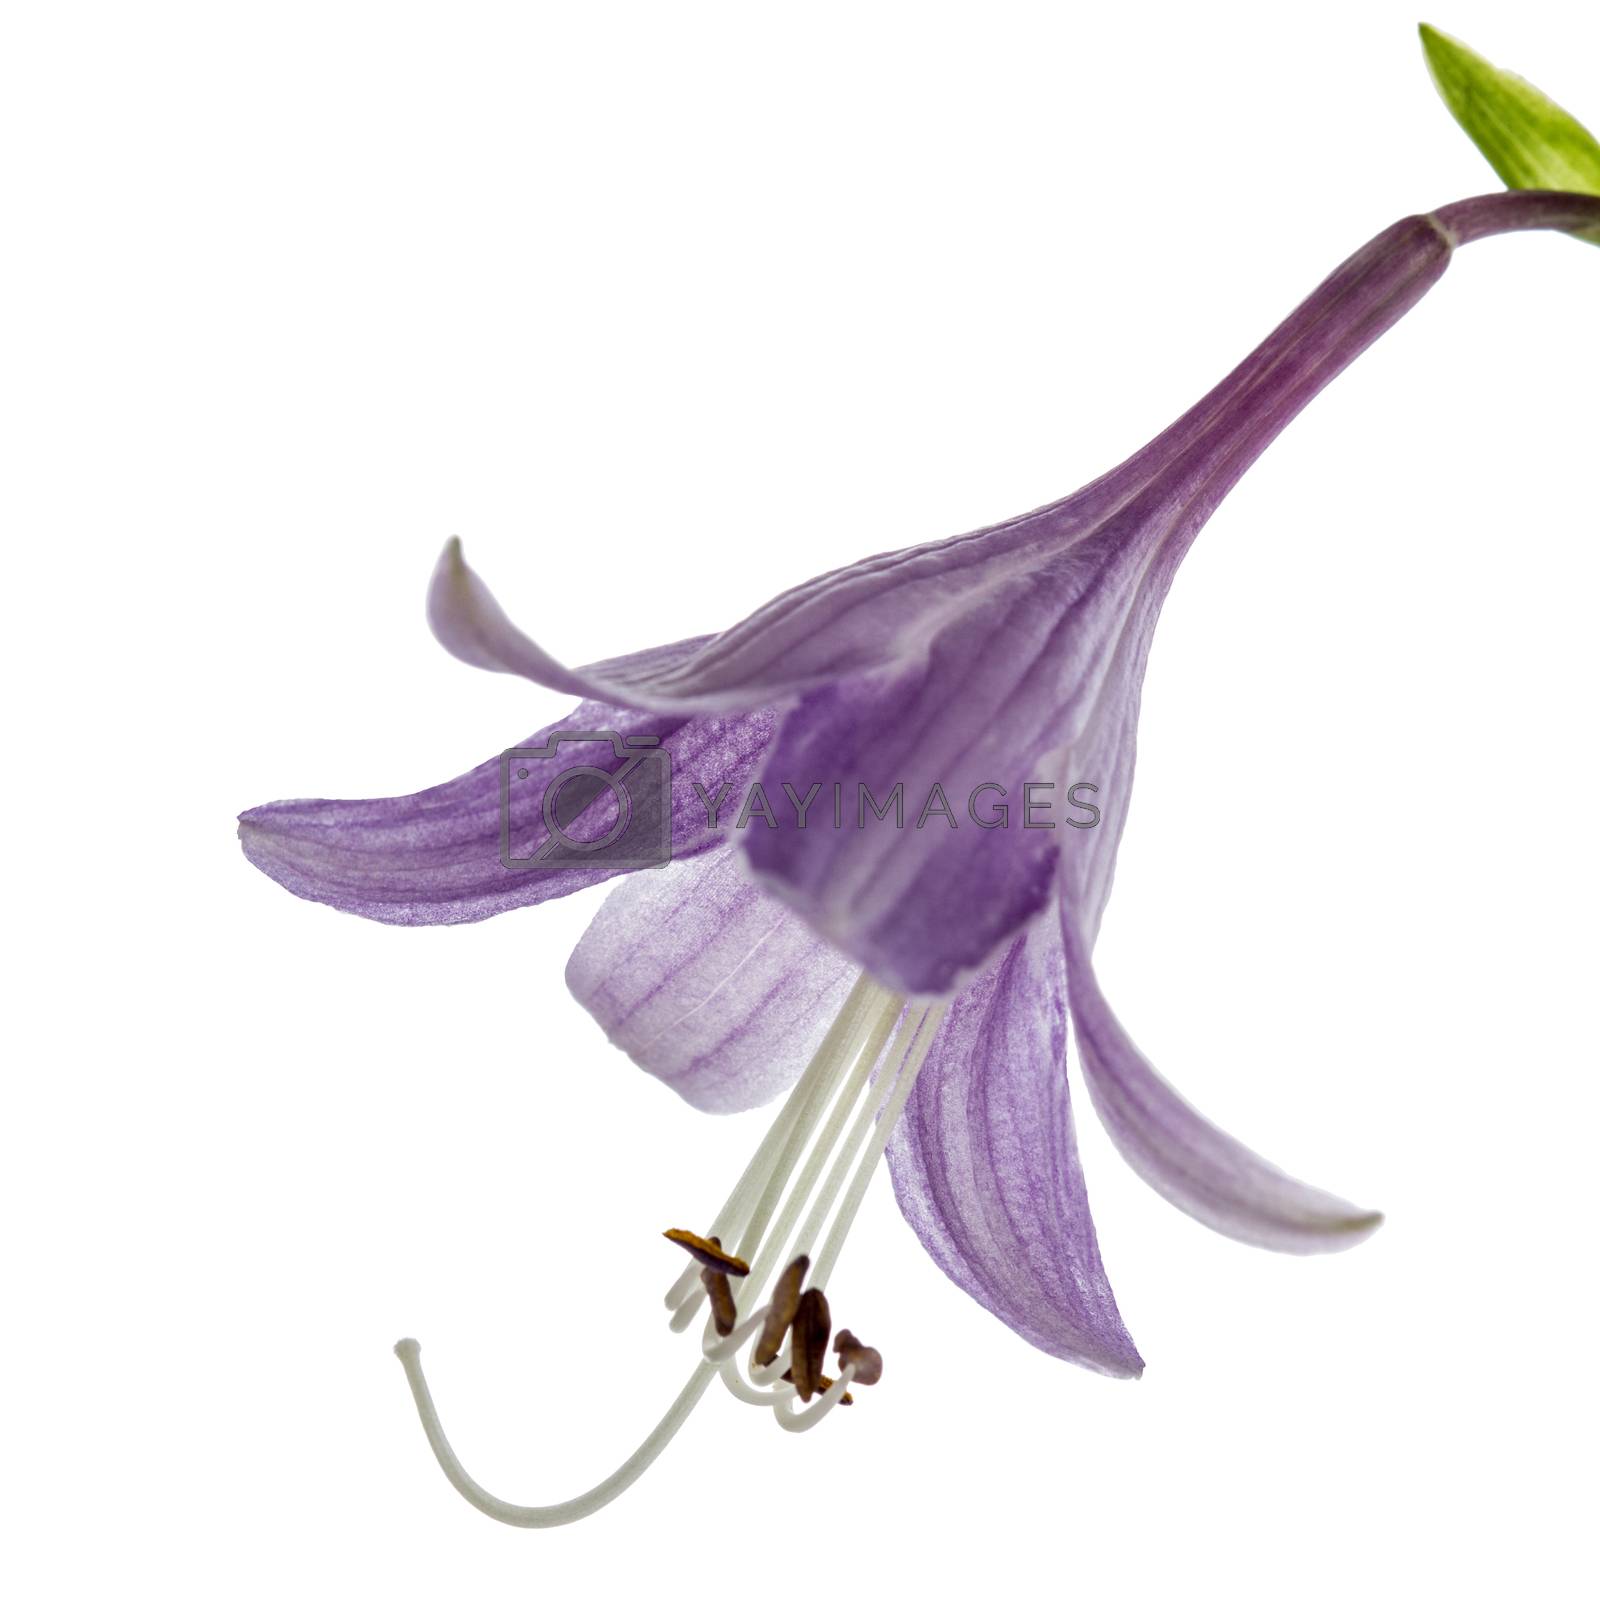 Royalty free image of Purple flower of the hosta (funkia), isolated on white backgroun by kostiuchenko